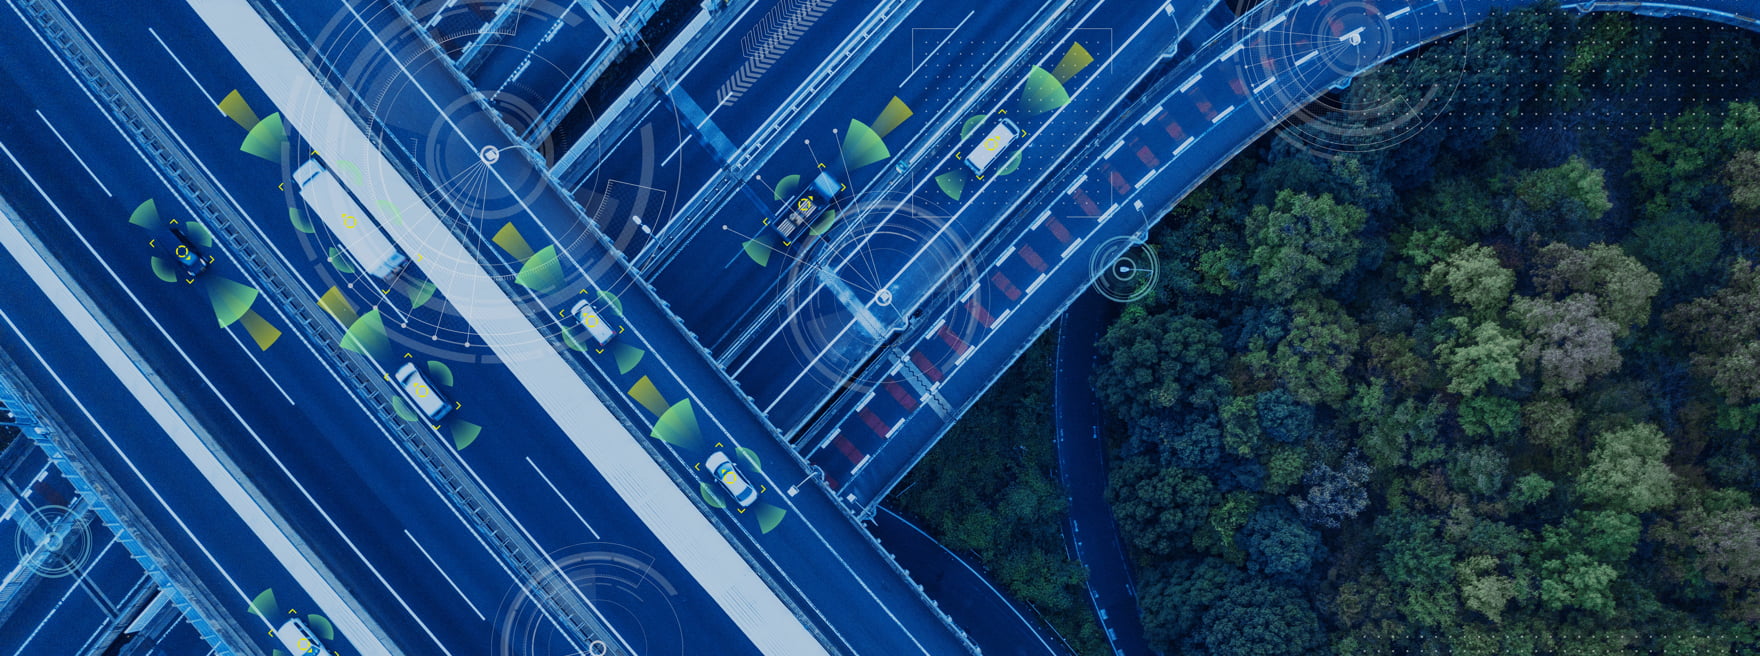 Smart Mobility with Intelligent Vehicles & Infrastructure